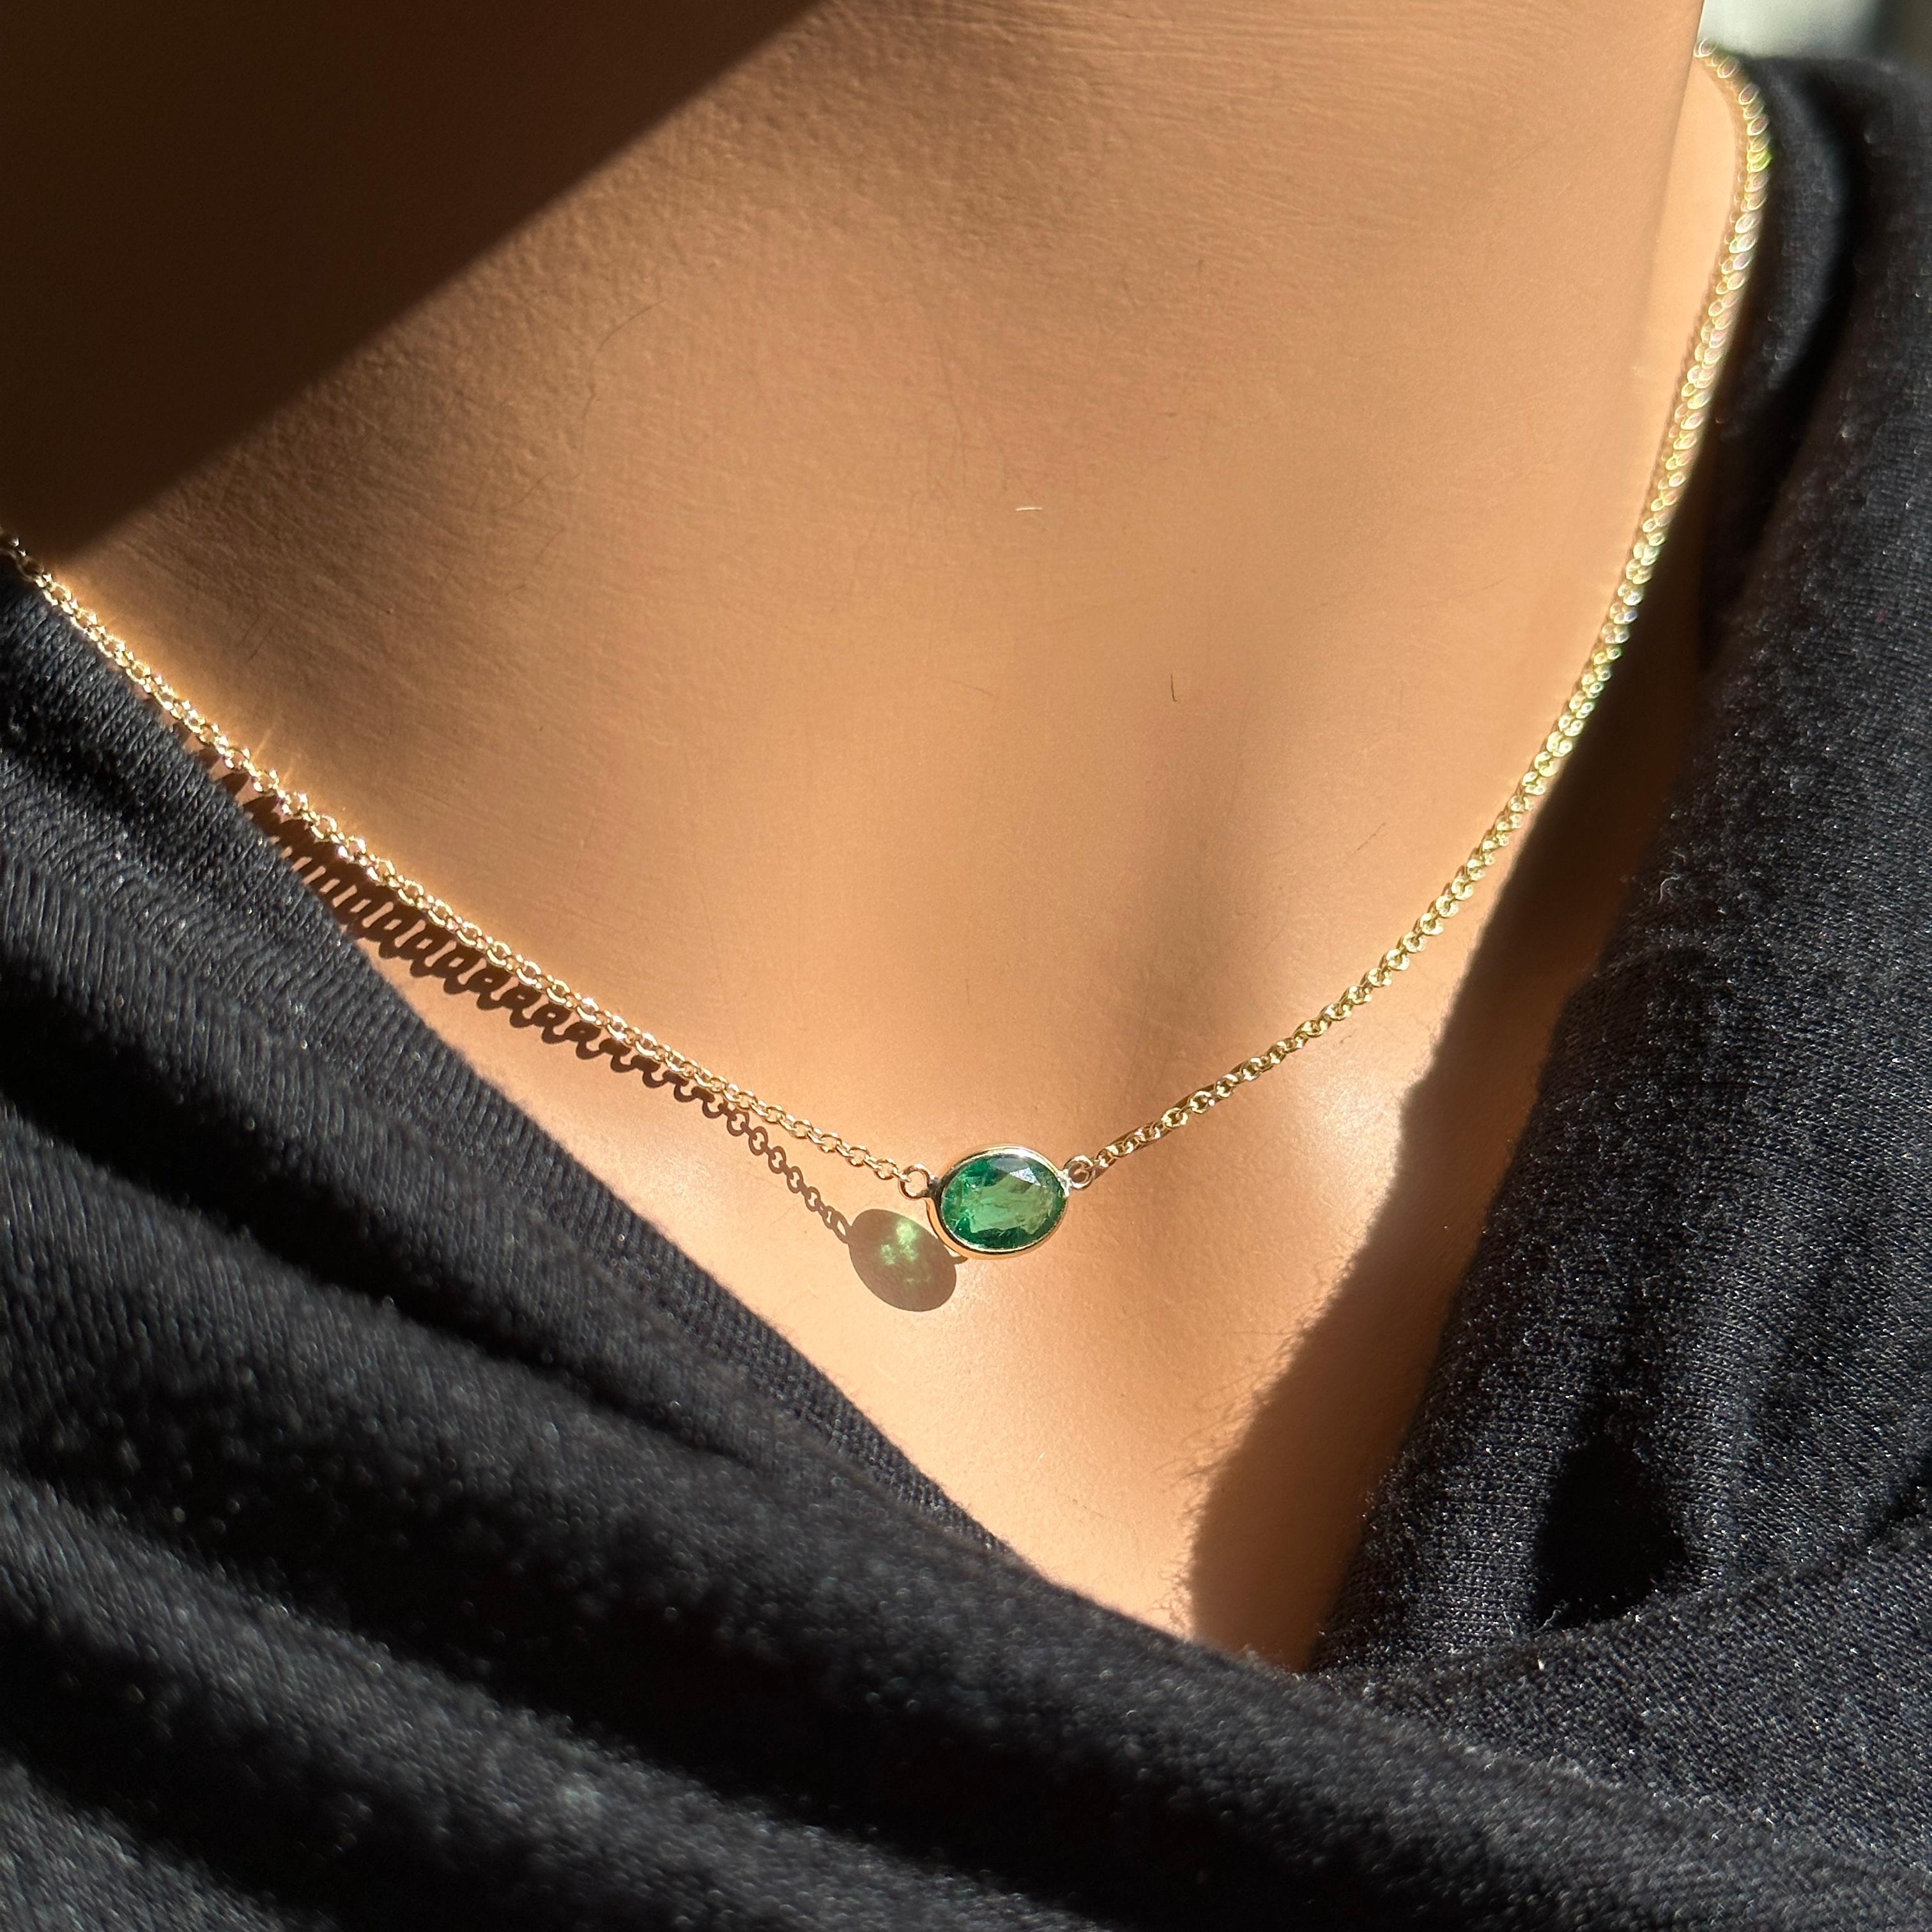 Oval Cut 0.97 Carat Emerald Green Oval & Fashion Necklaces In 14K Yellow Gold For Sale